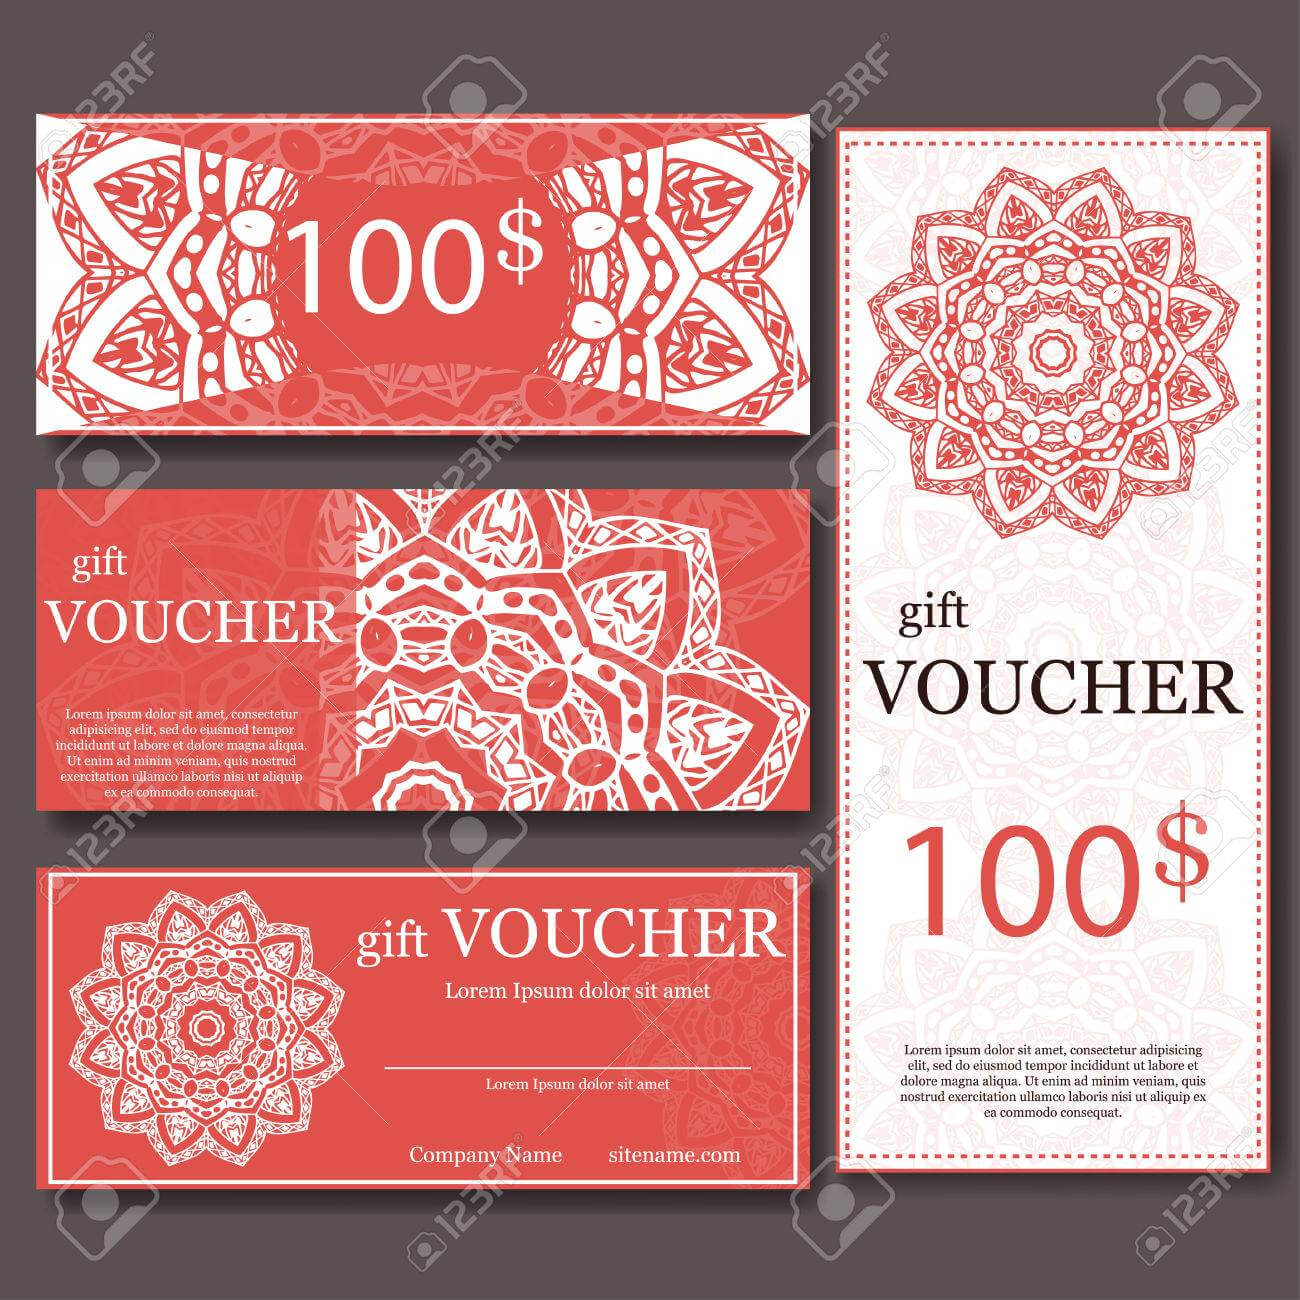 Gift Voucher Template With Mandala. Design Certificate For Sport.. Within Yoga Gift Certificate Template Free